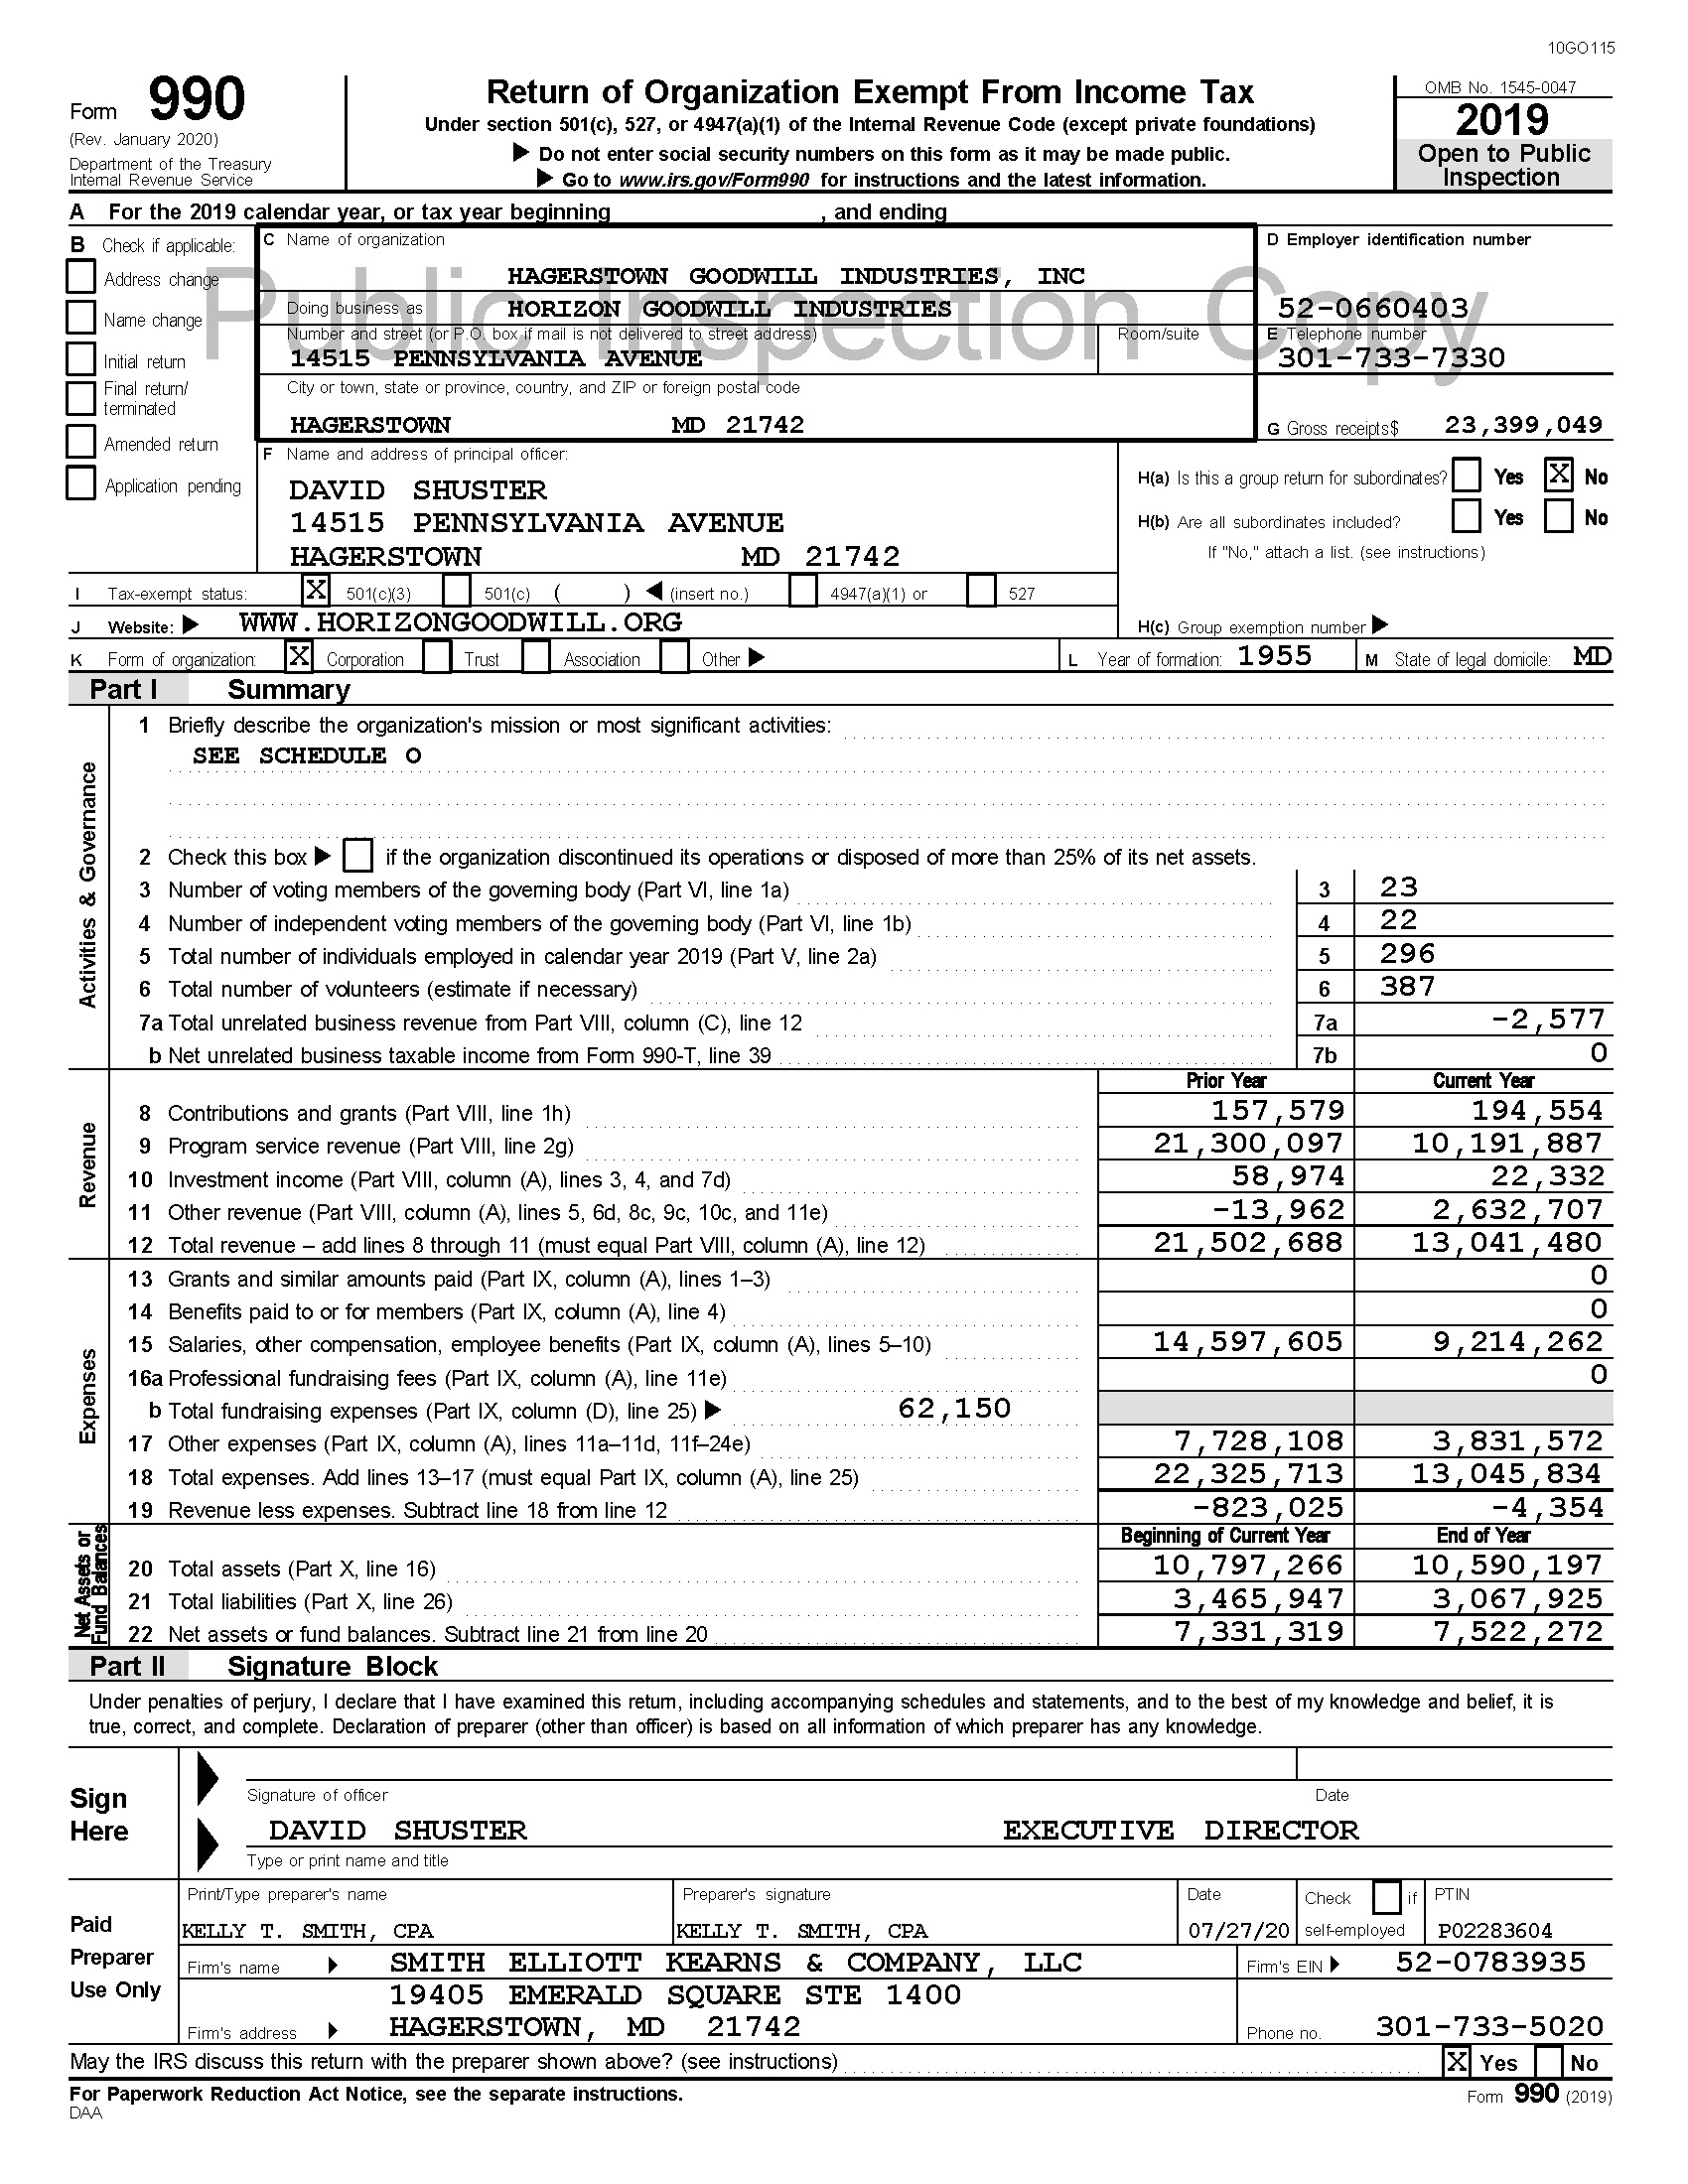 Pages from 2019 PublicInspectionTaxDocuments HGI.pdf - Form 990